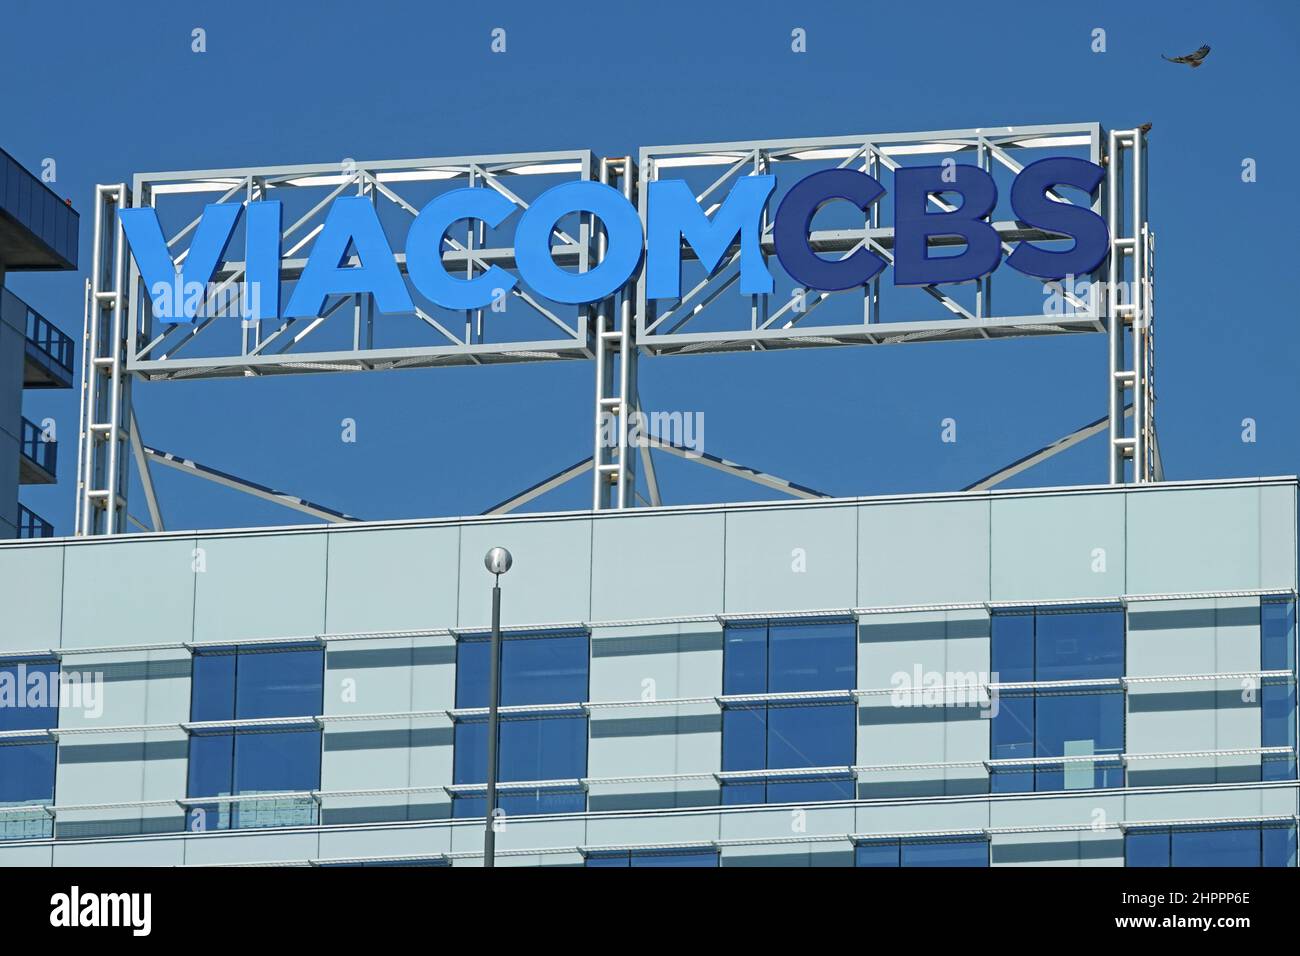 Los Angeles, CA / USA - Feb. 18, 2022: A VIACOMCBS logo is shown atop a building at CBS Columbia Square in Hollywood. Stock Photo